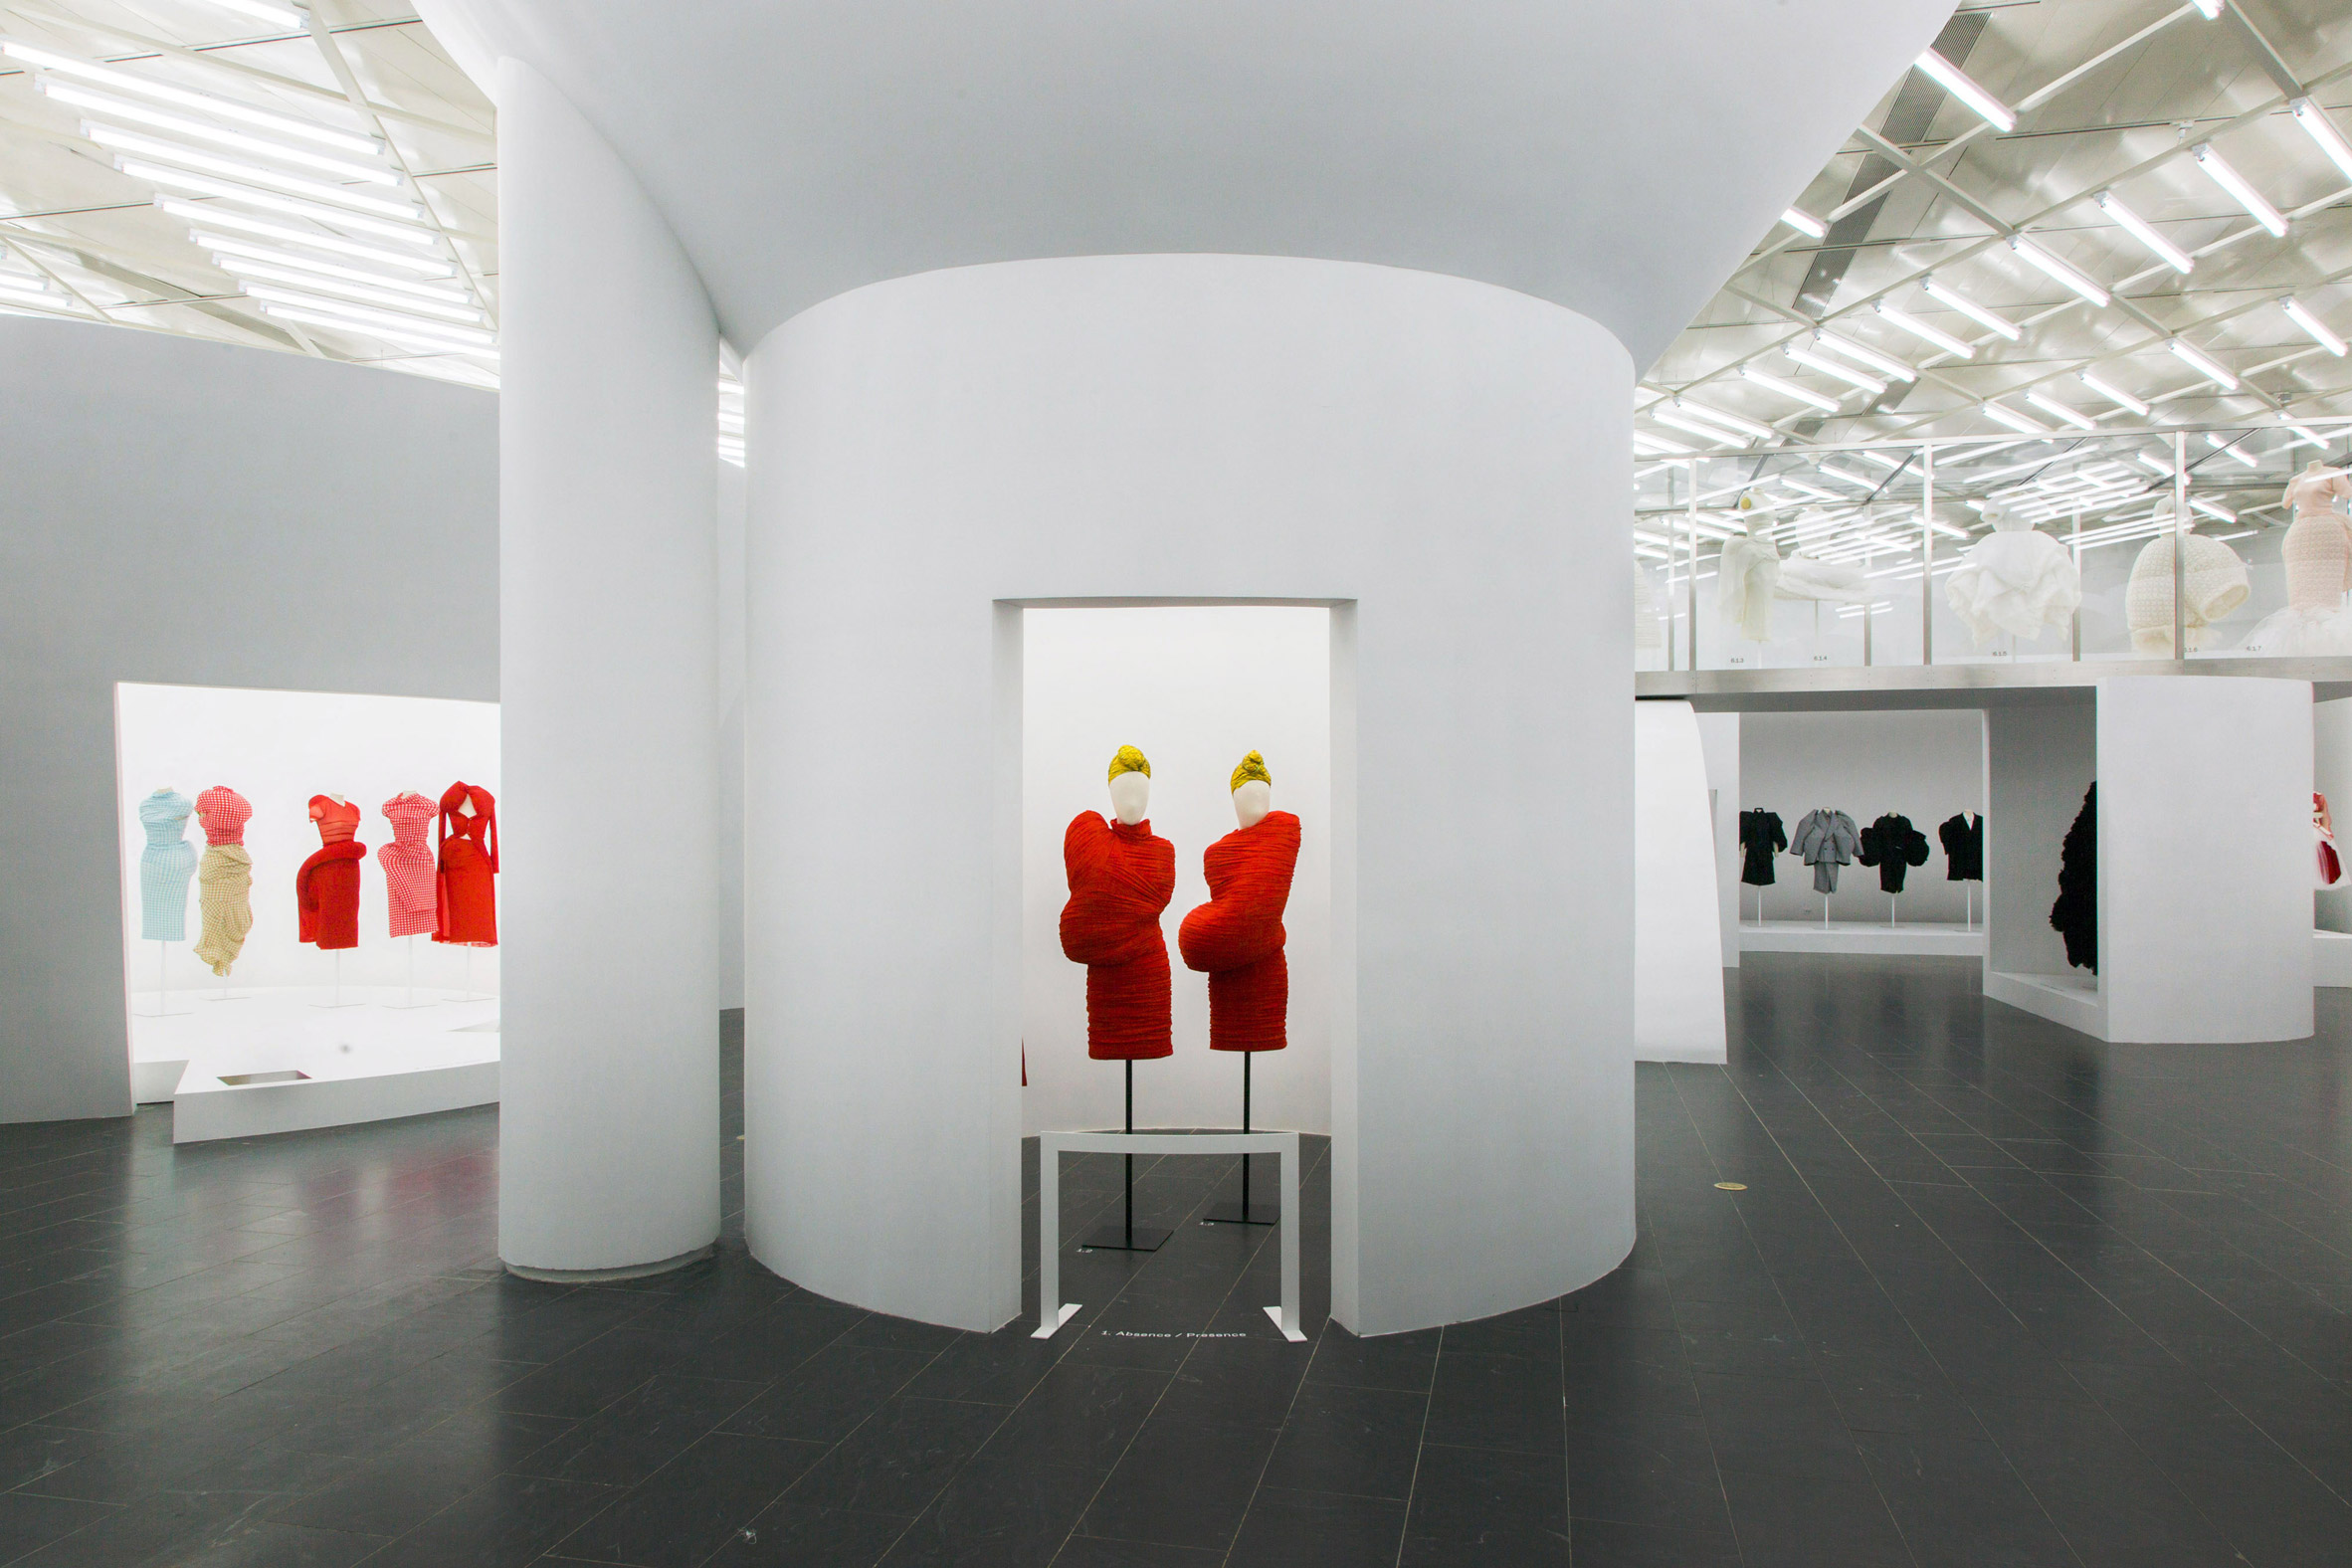 Comme des Garçons fashion exhibition at The Met in New York; Gallery View, Absence/Presence